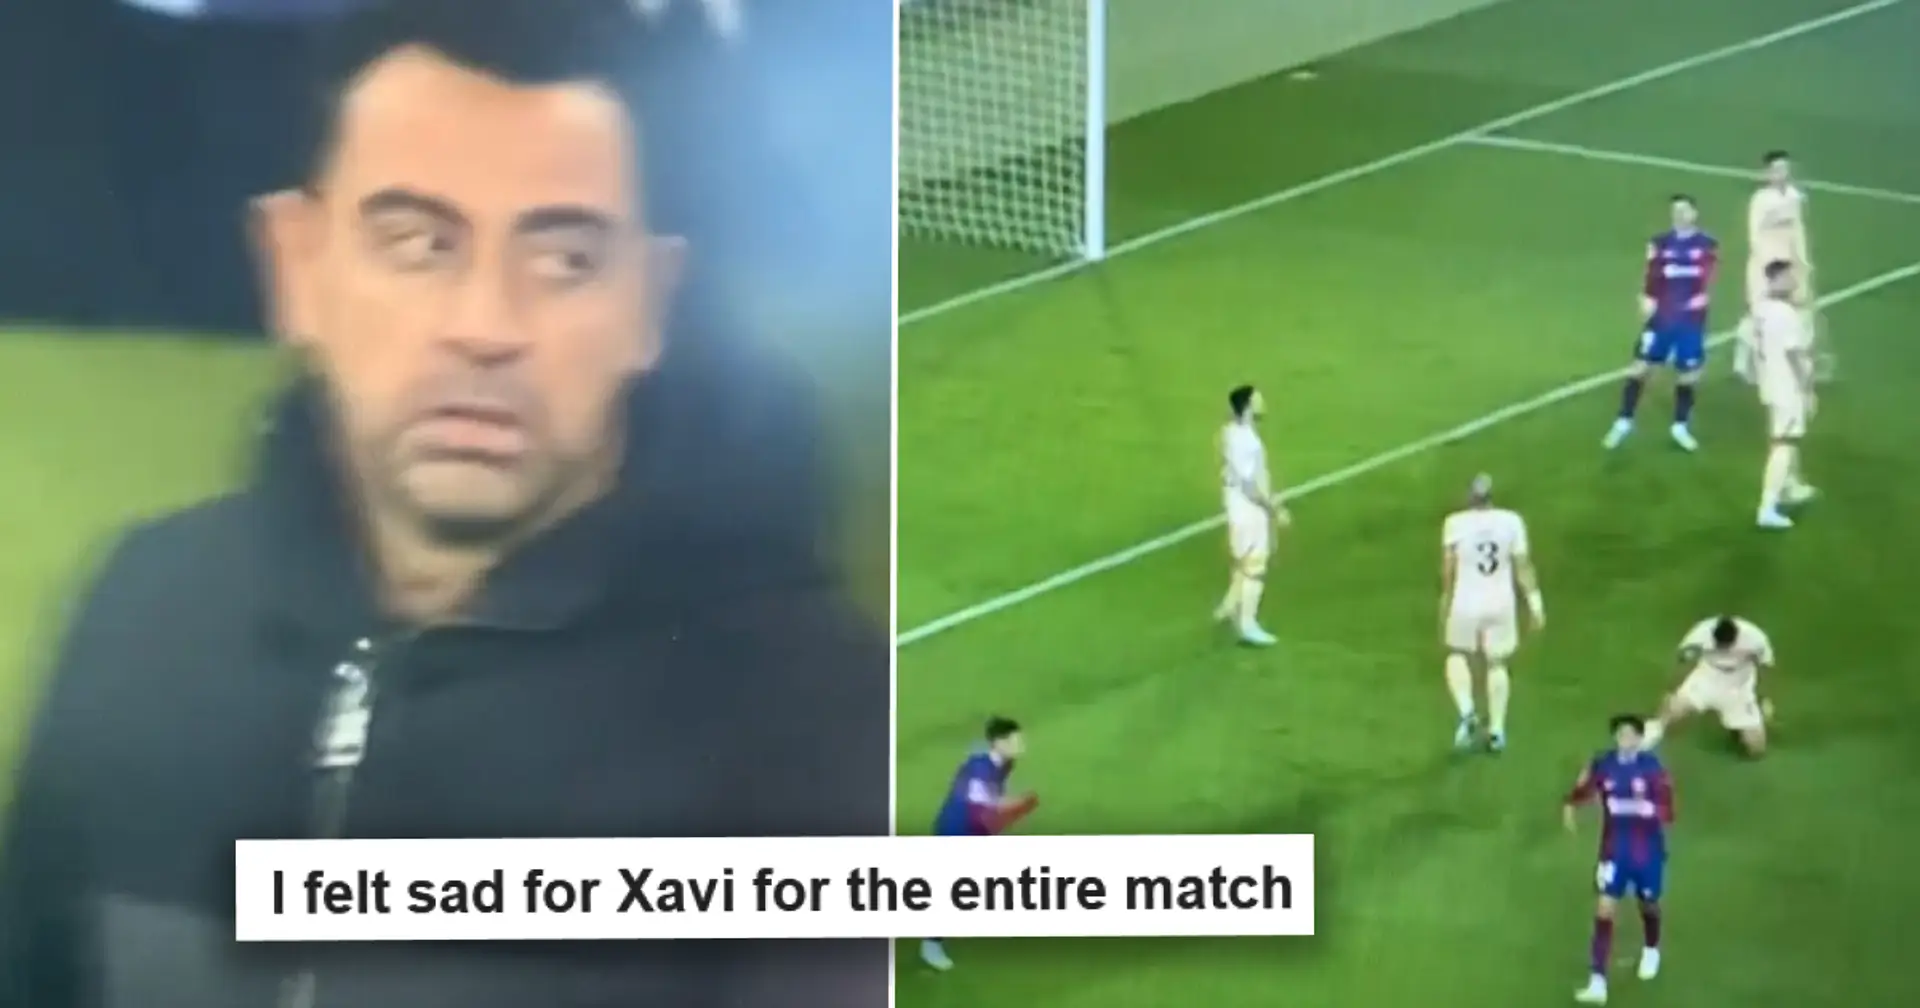 'They feel like they have something to prove': Fan shows example of Barca players' selfishness 